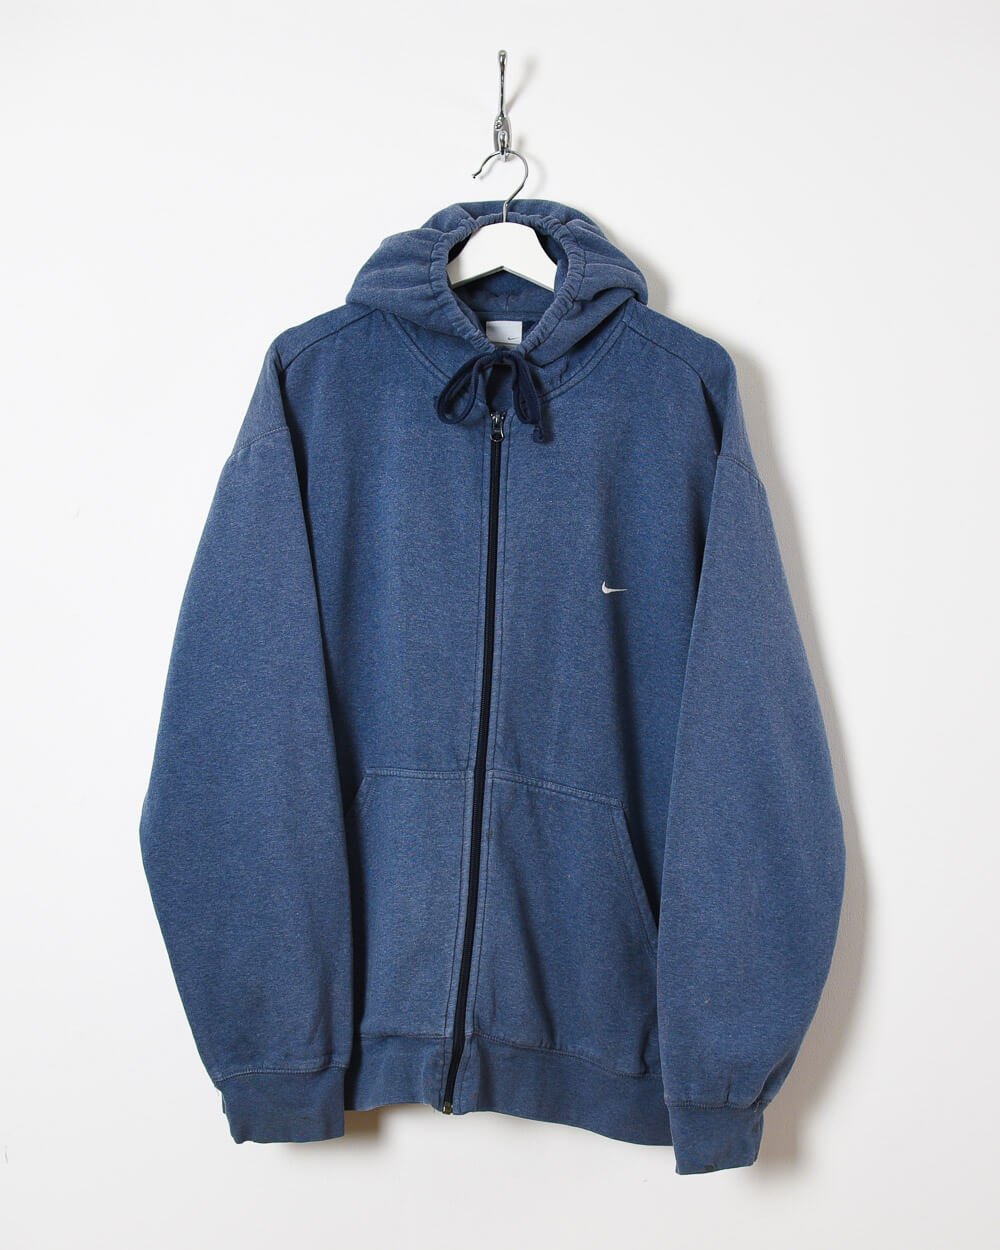 Nike Air Max Zip-Through Hoodie - XX-Large - Domno Vintage 90s, 80s, 00s Retro and Vintage Clothing 